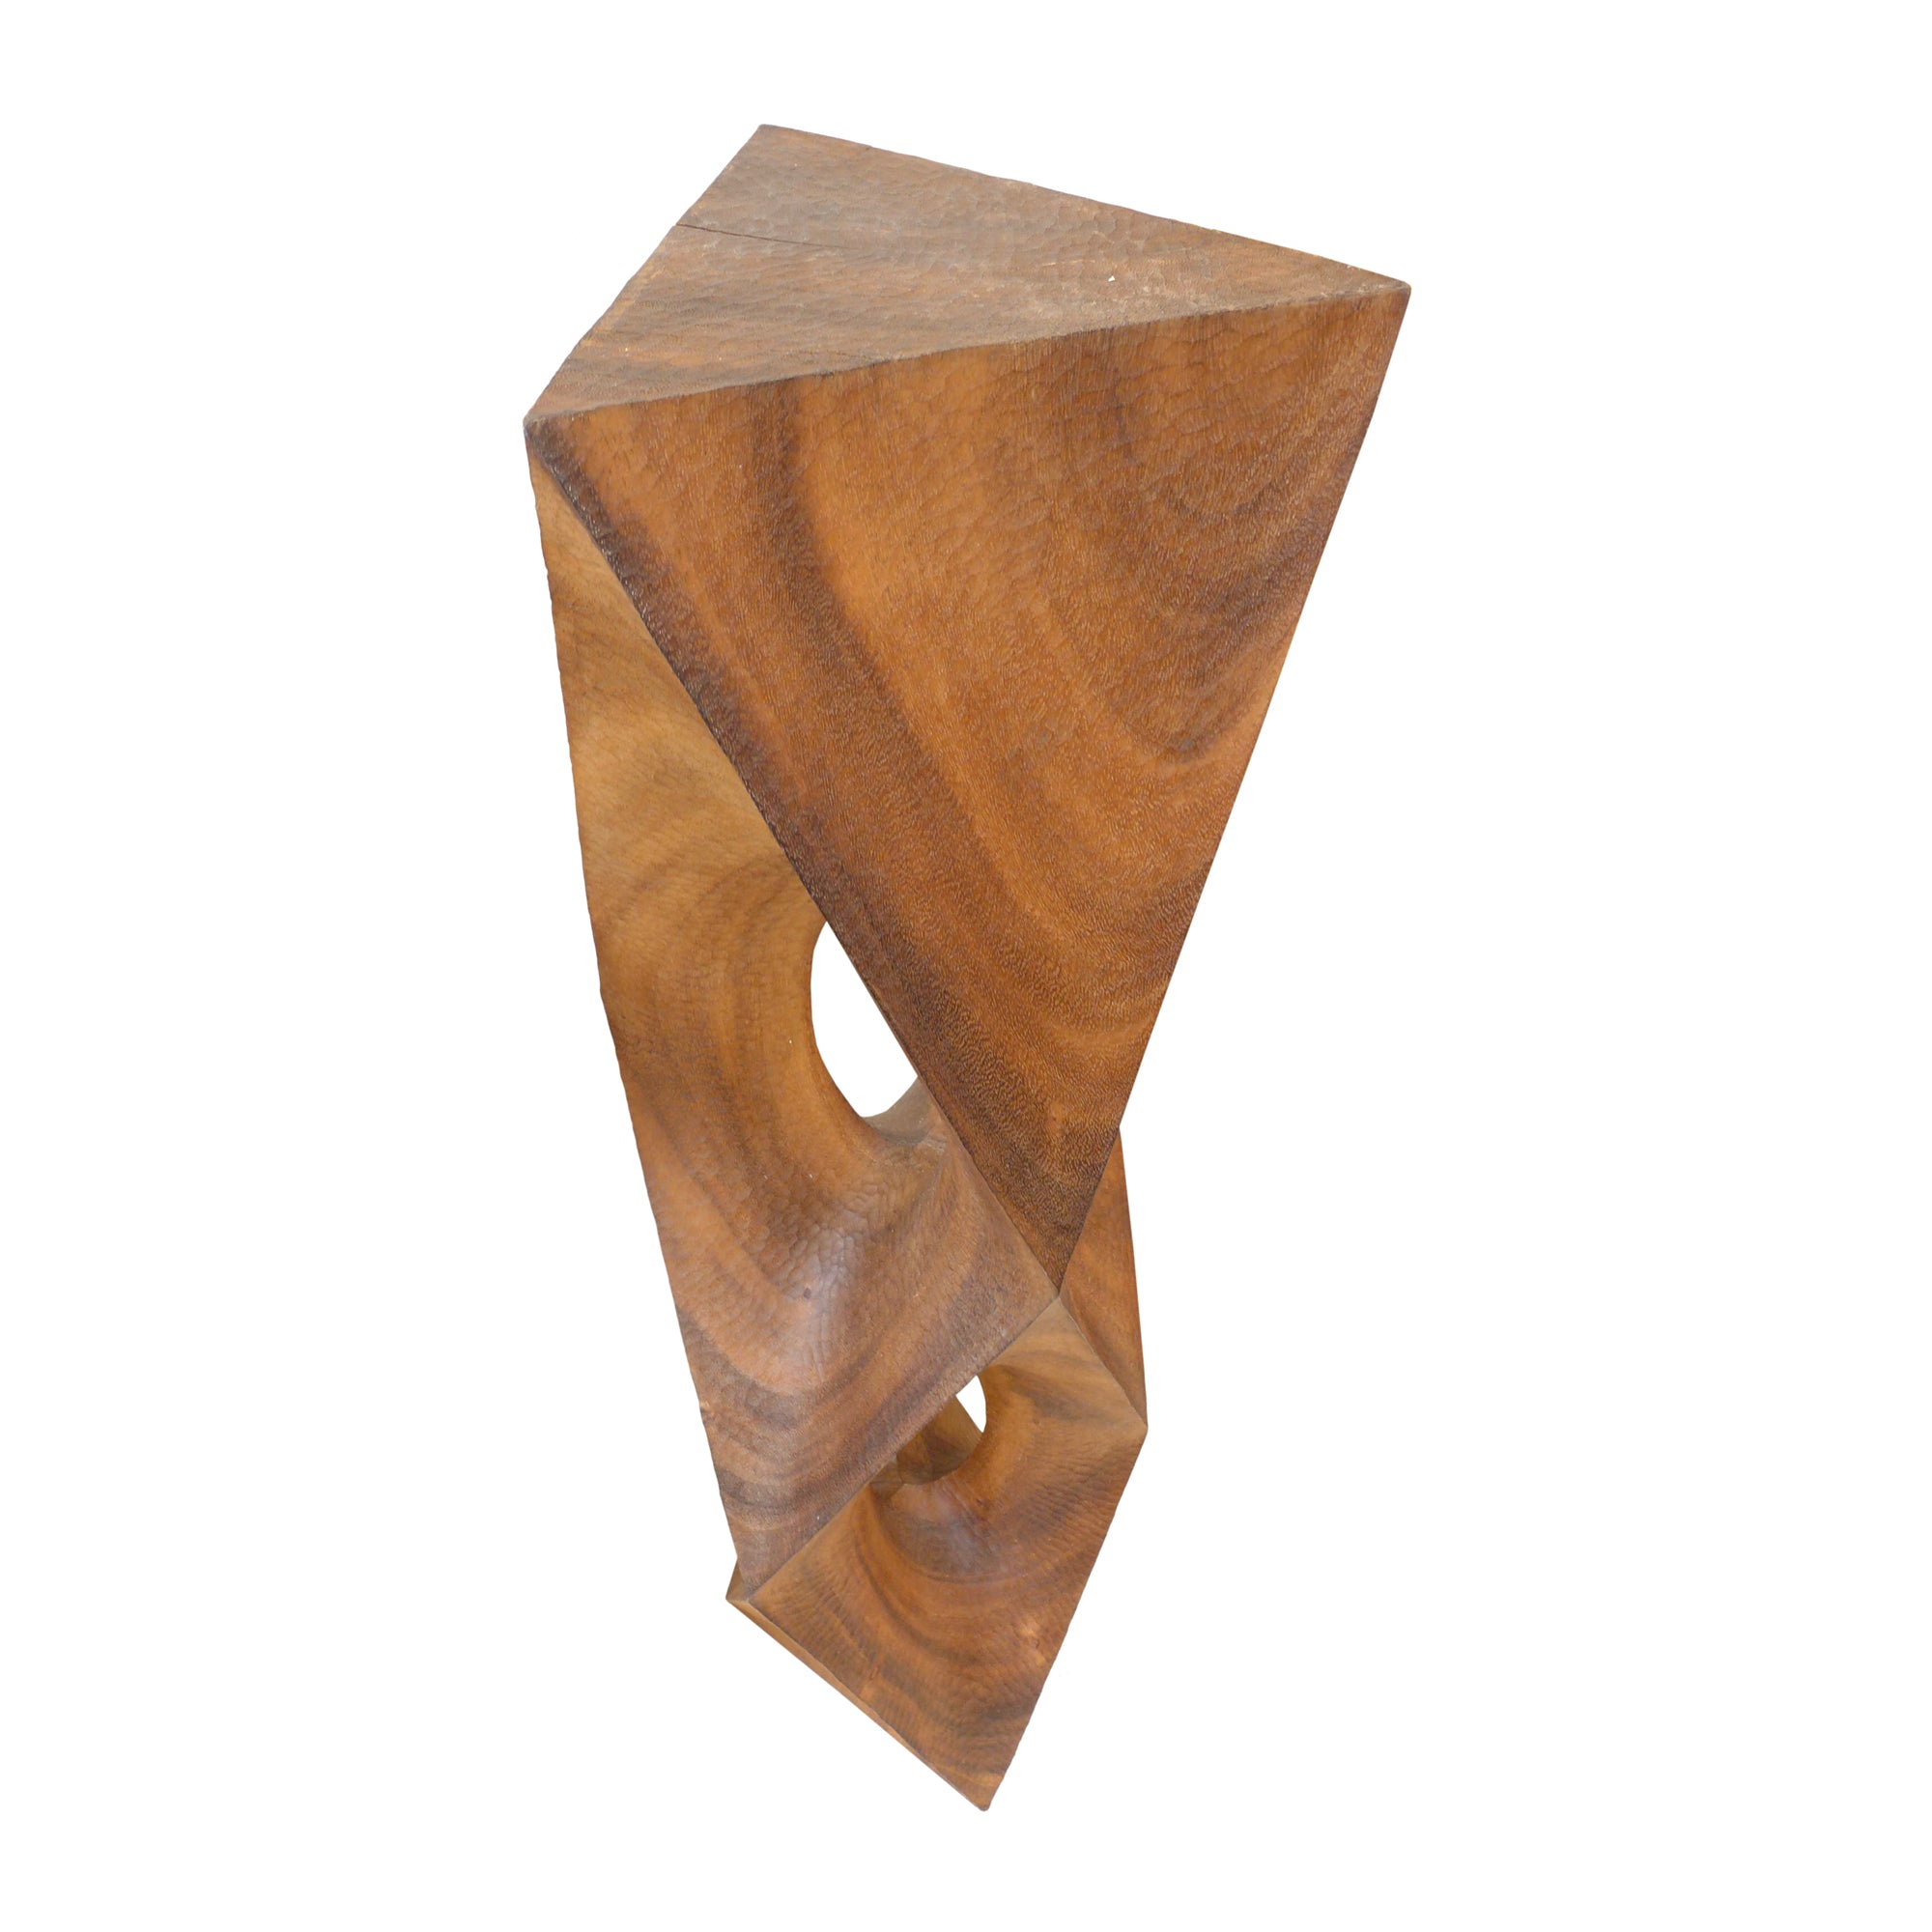 Monumental Contemporary Carved Wood "Hard/Soft" Totem Sculpture by Aleph Geddis